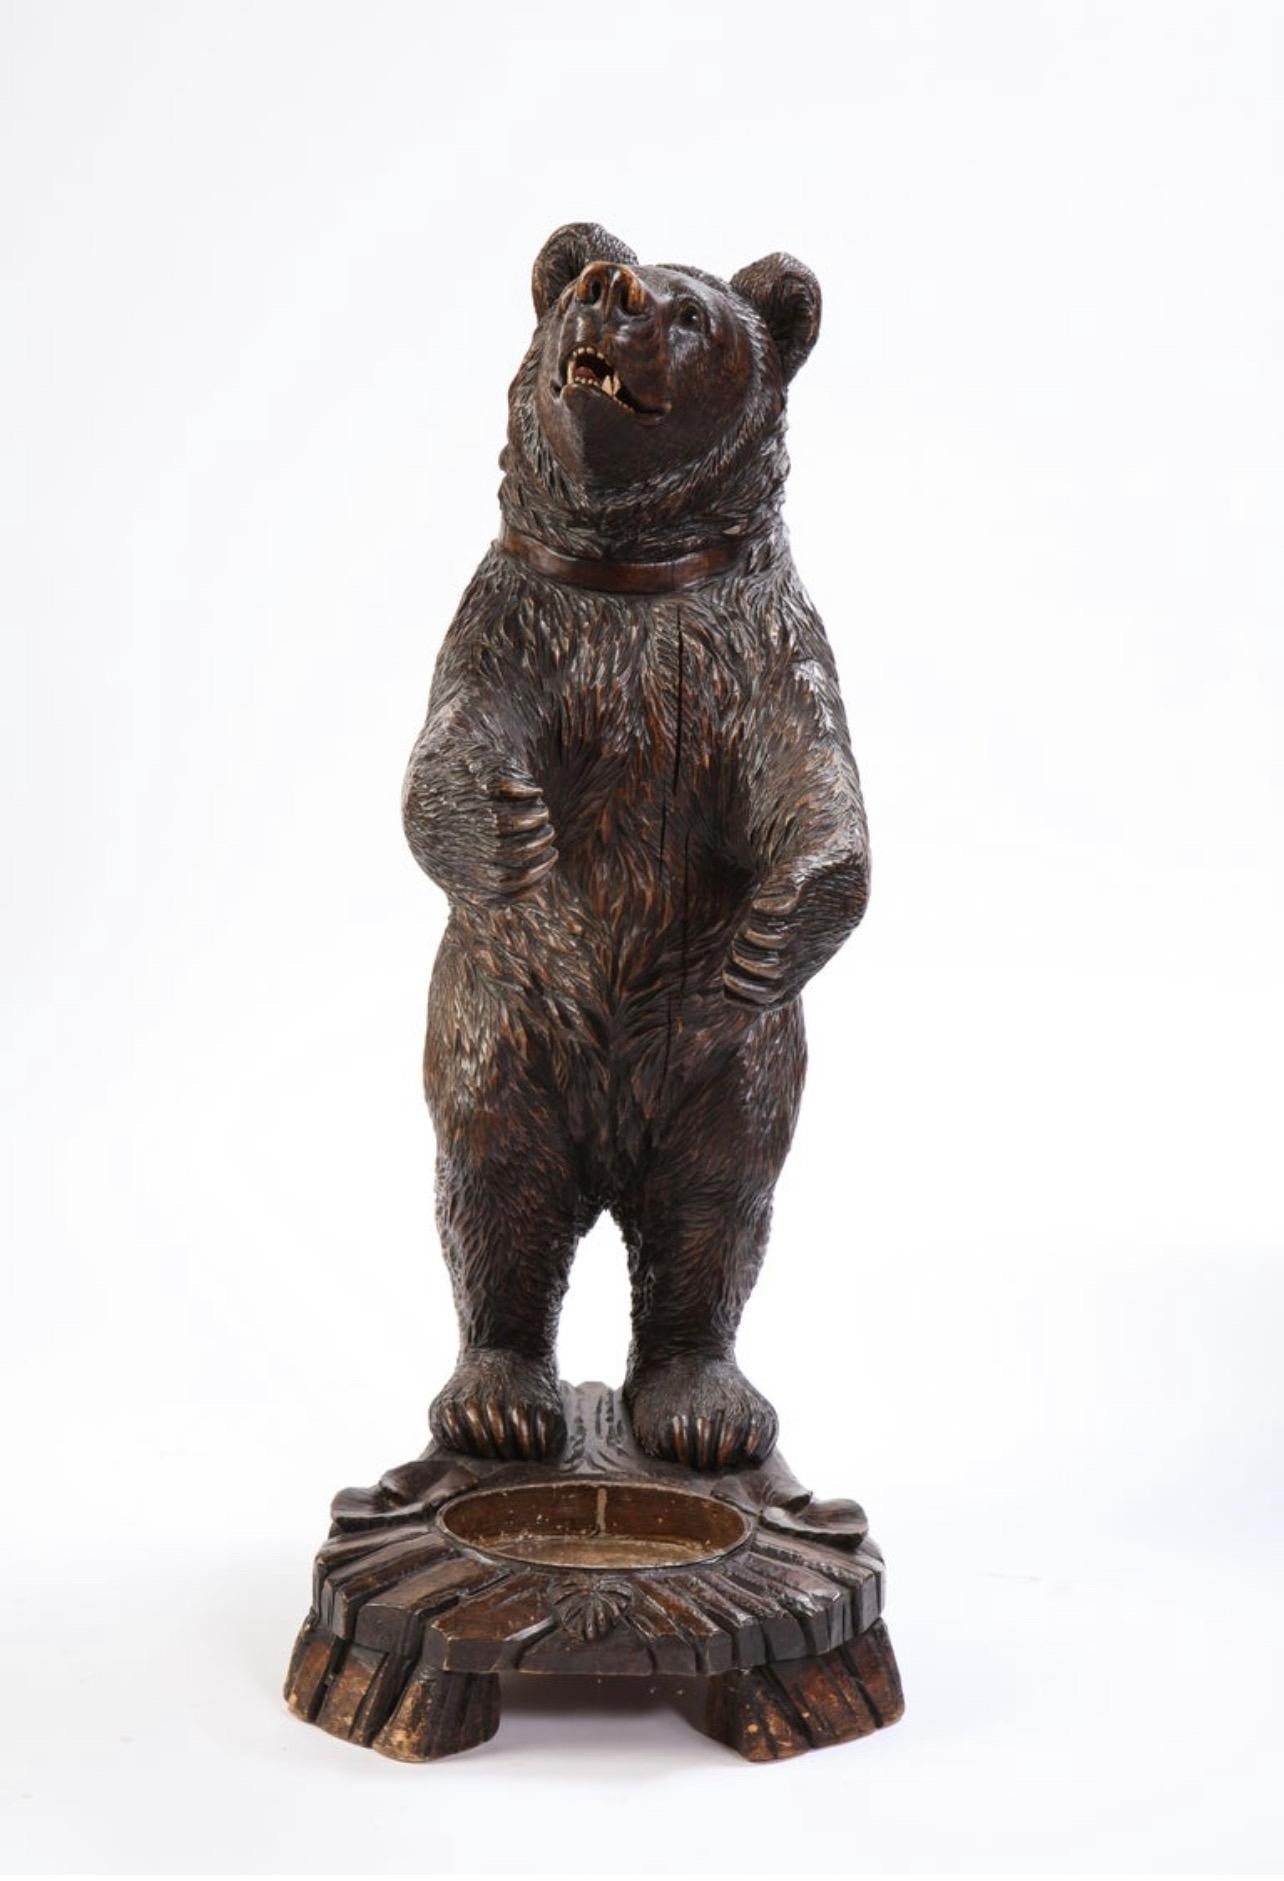 Early 20th century Swiss 'Black Forest' stick & umbrella stand in the form of a charming bear with inset glass eyes. Arms outstretched in a hug-like form the piece will fit perfectly in a front foyer or boot room. With a metal liner at the base the